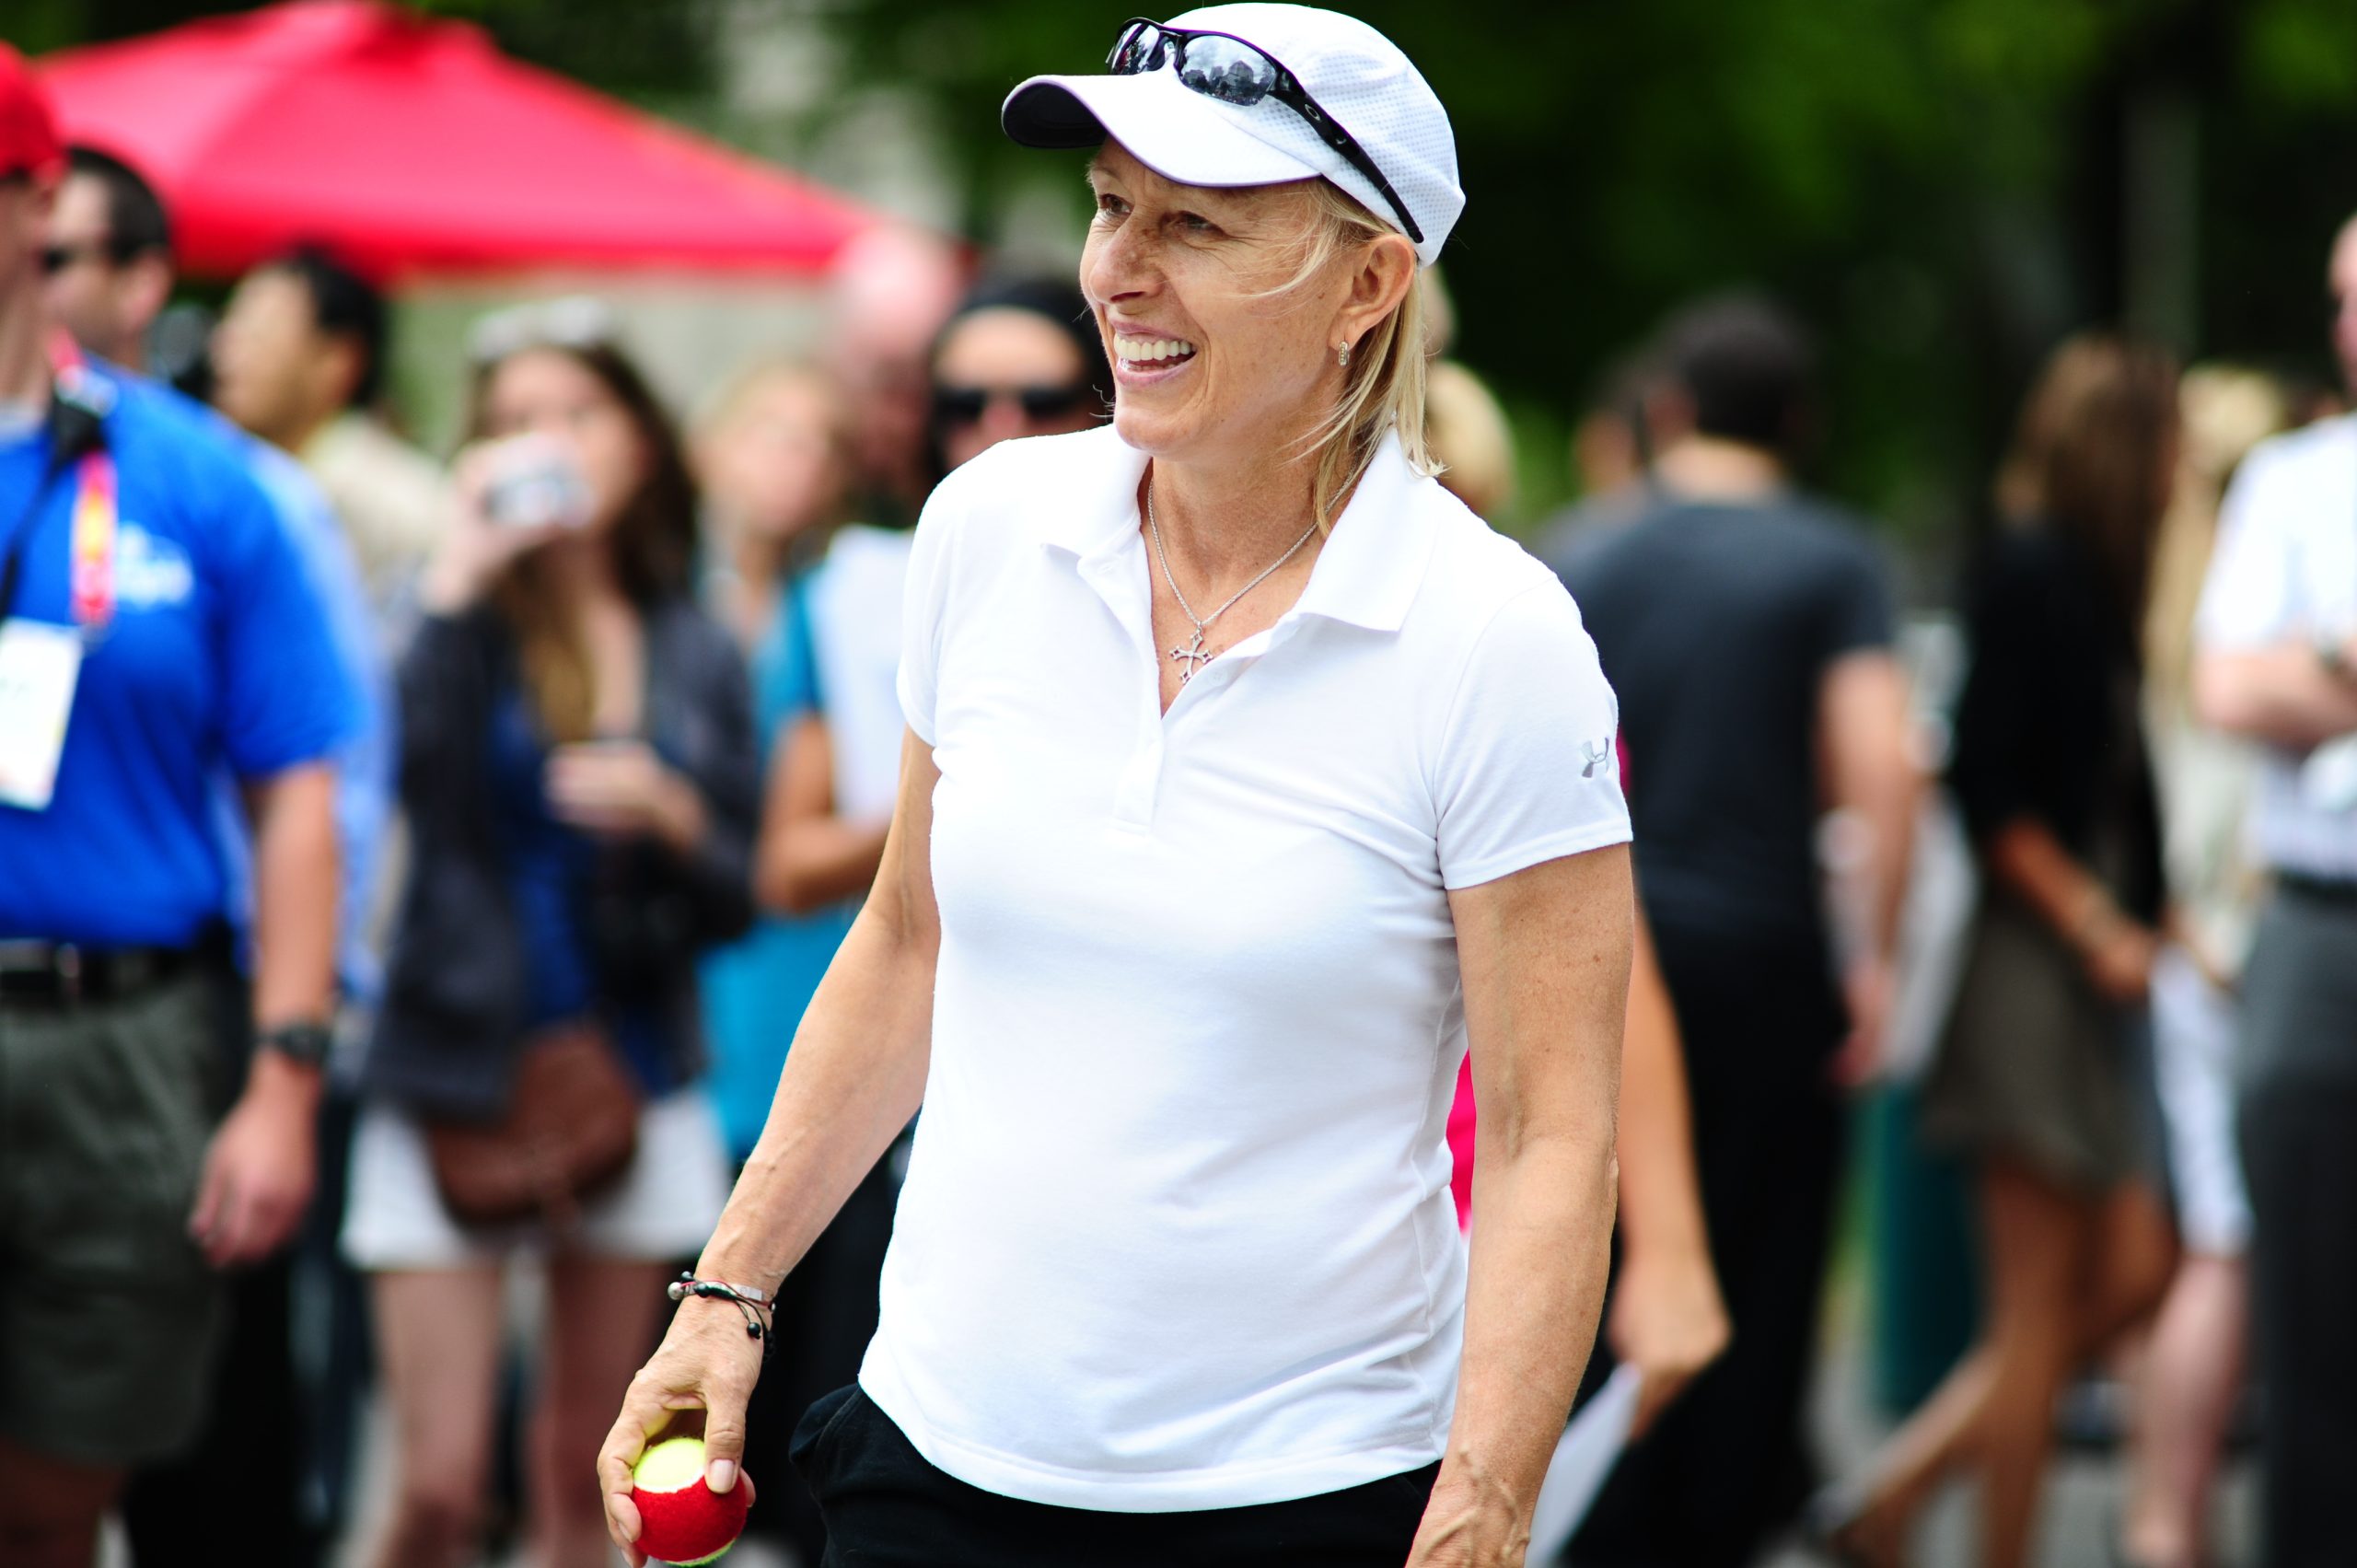 Tennis legend Celebrity Martina Navratilova, 66, has been diagnosed with throat and breast cancer